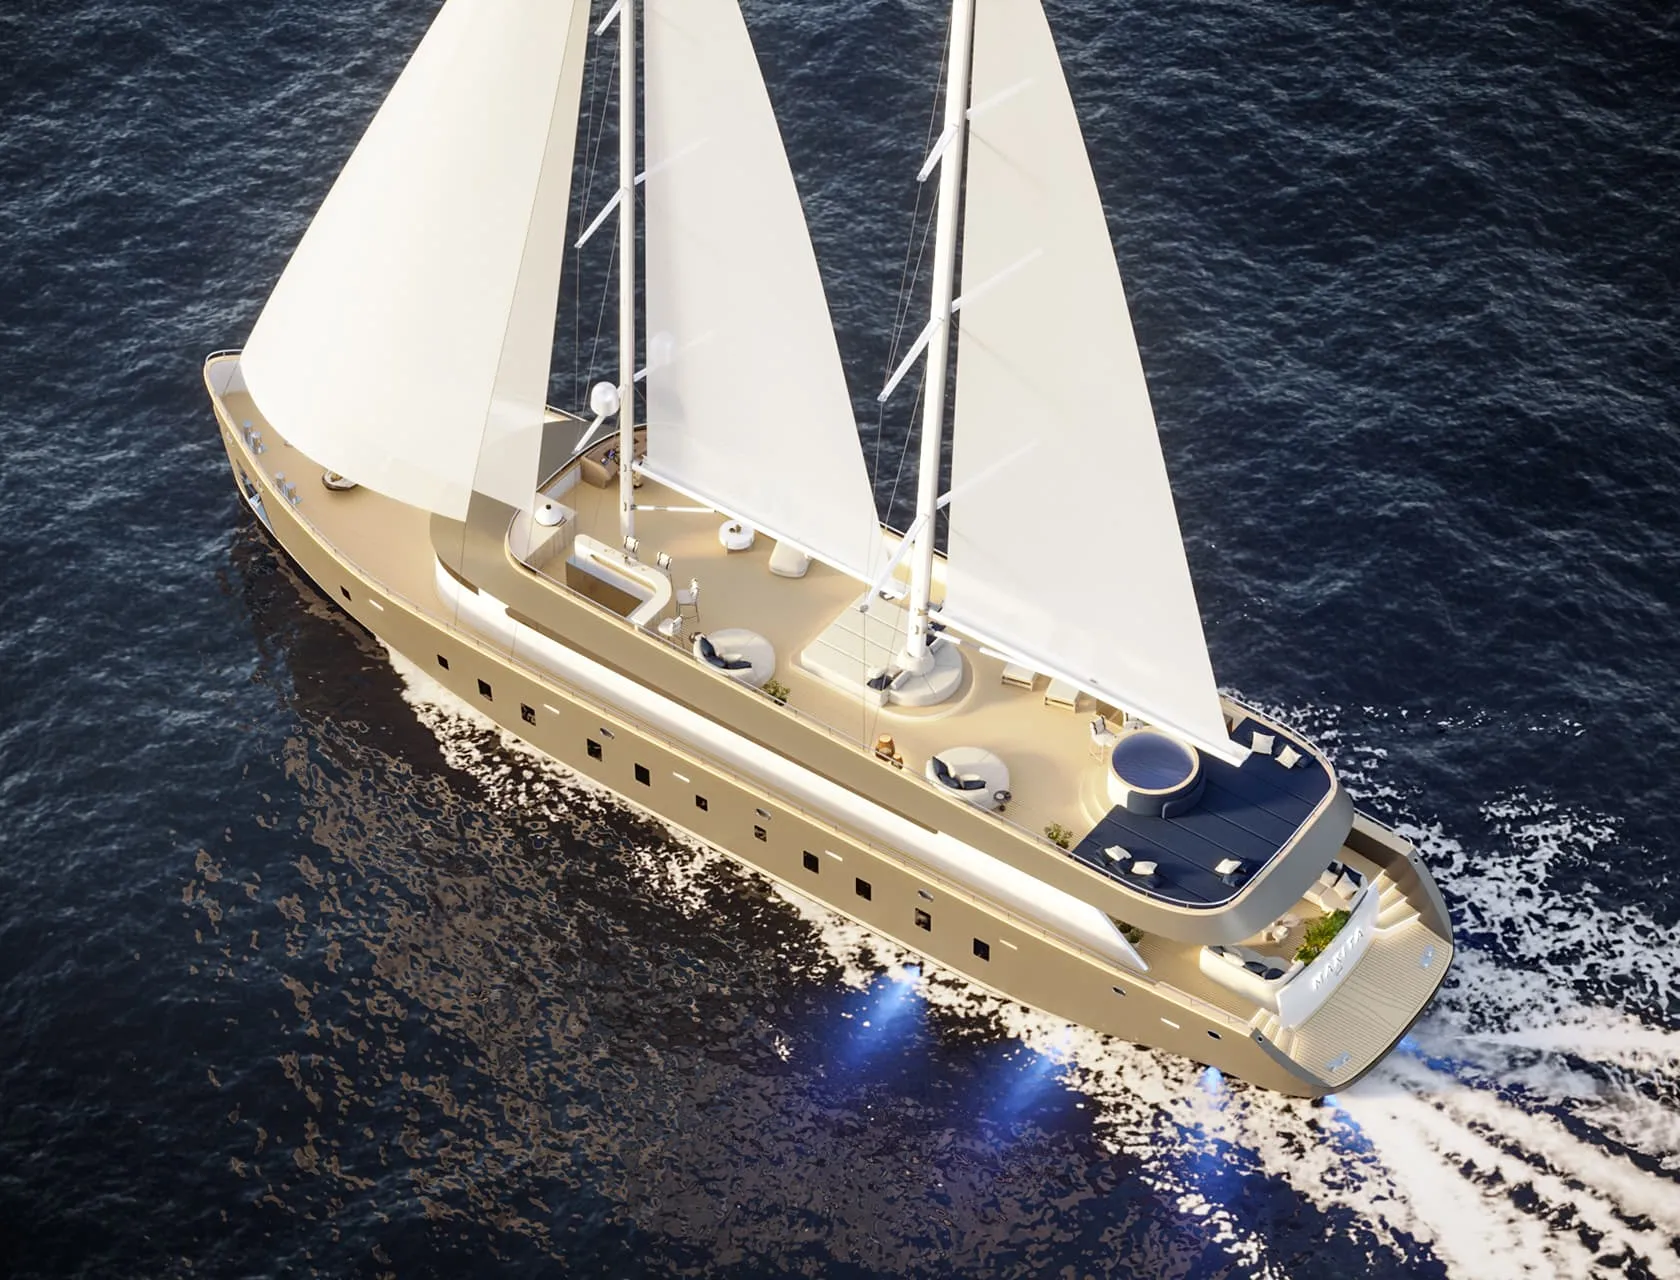 An extraordinary yacht charter in the Adriatic Sea aboard a brand-new luxury DS Yacht Maxita